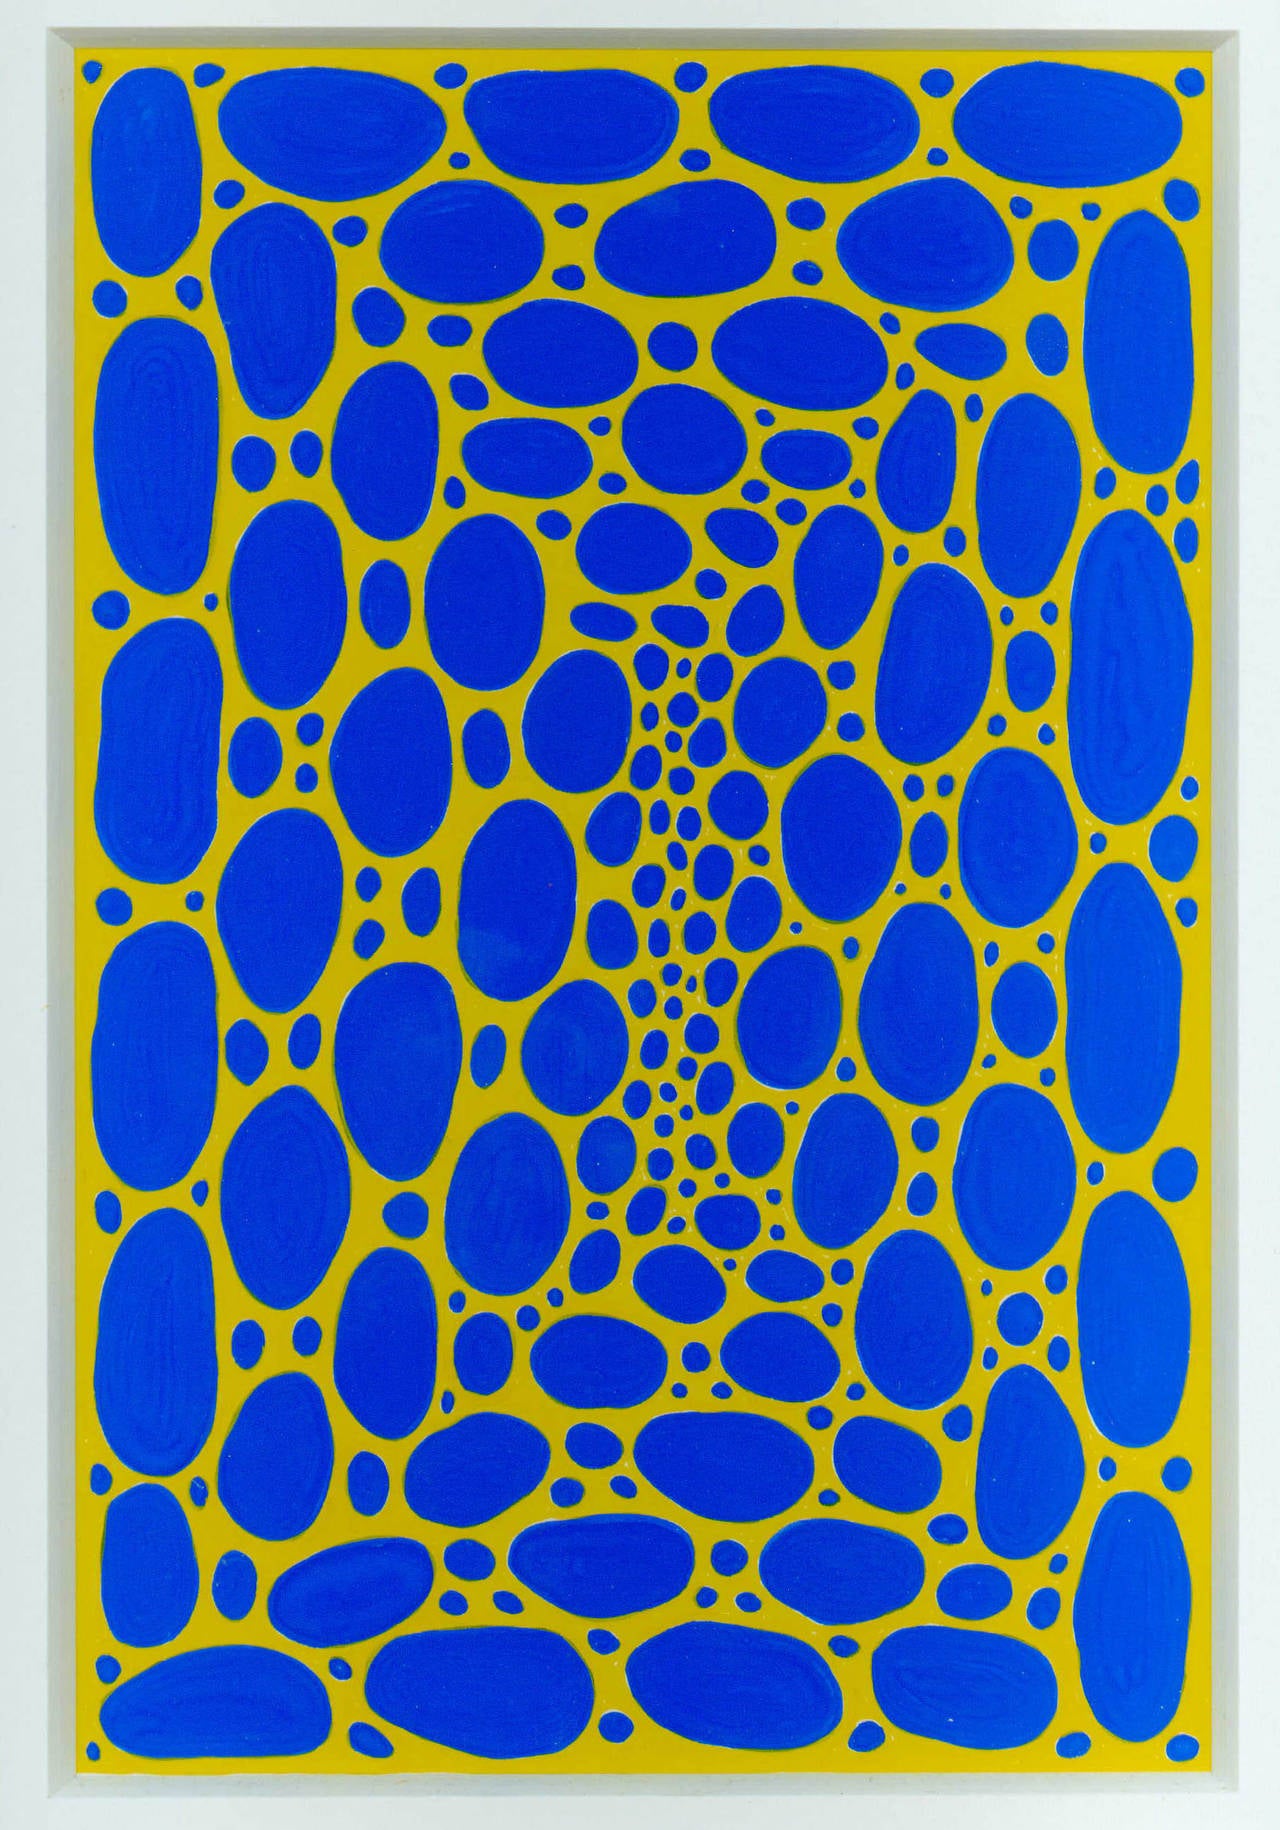 James Siena Abstract Painting - 17 Spirals in Blue and Yellow